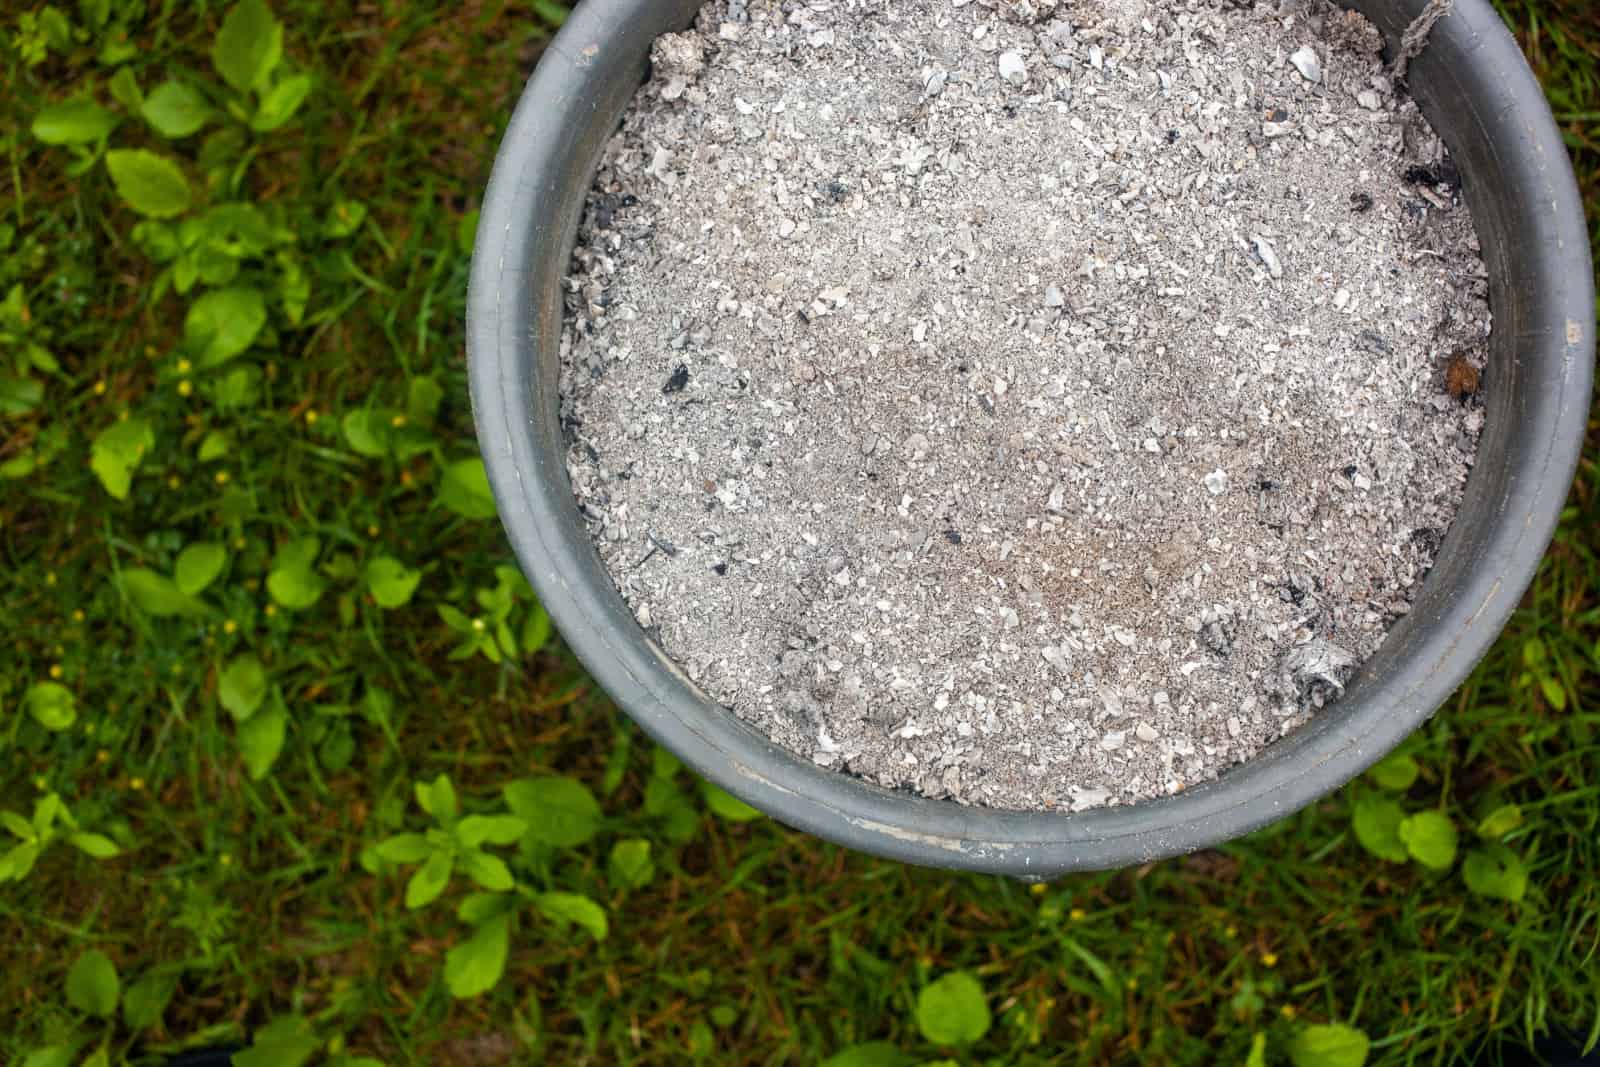 ashes in a bucket on a grassy lawn